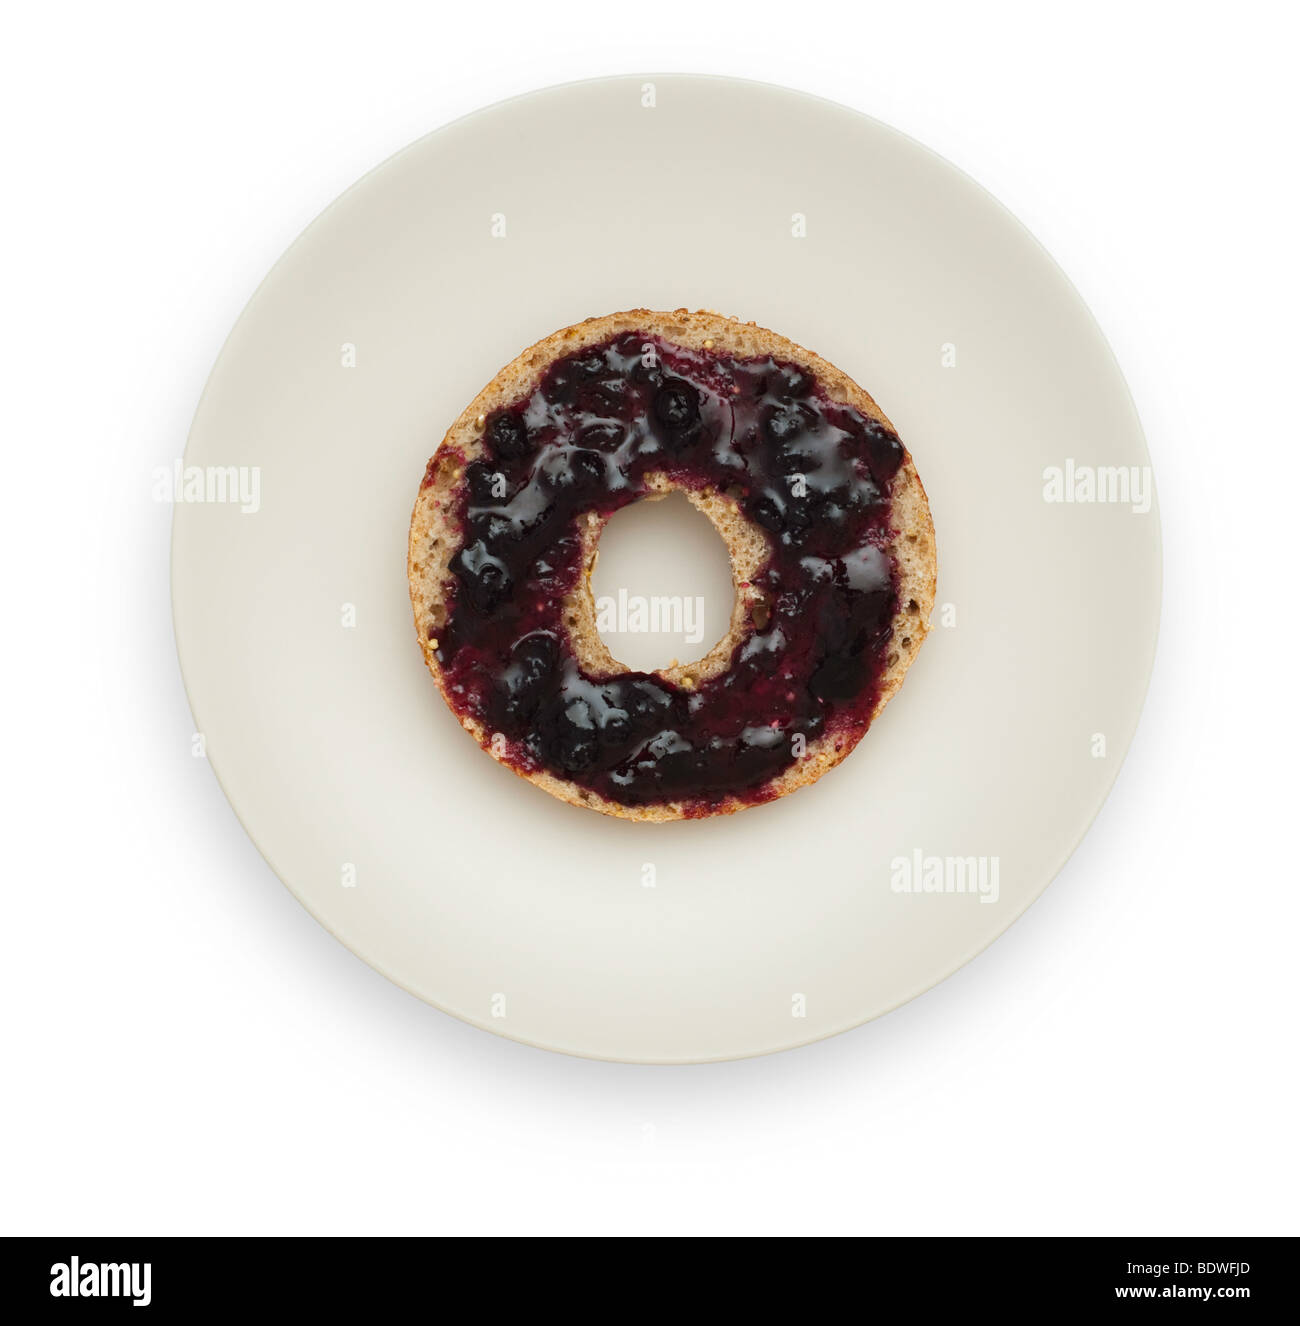 One half of a Whole Grain Bagel with Blueberry Marmalade on a white plate. Isolated on white background. Stock Photo